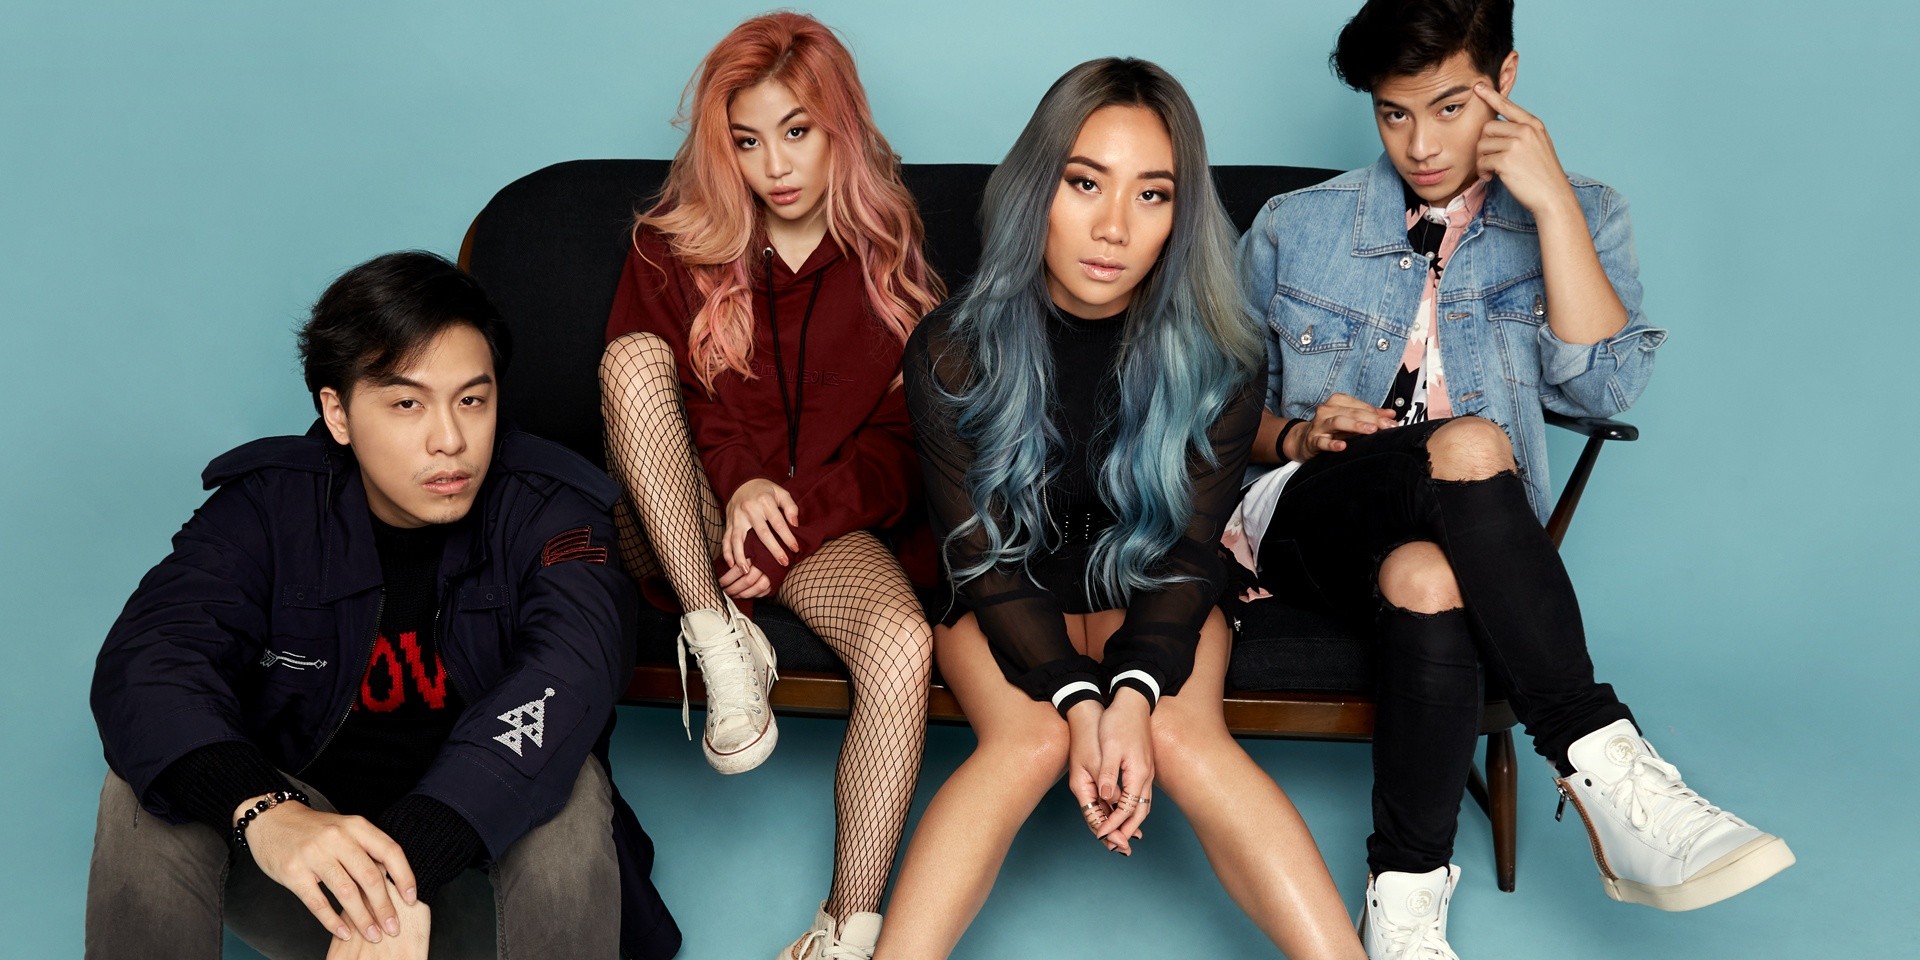 The Sam Willows announce title and release date of long-awaited second album